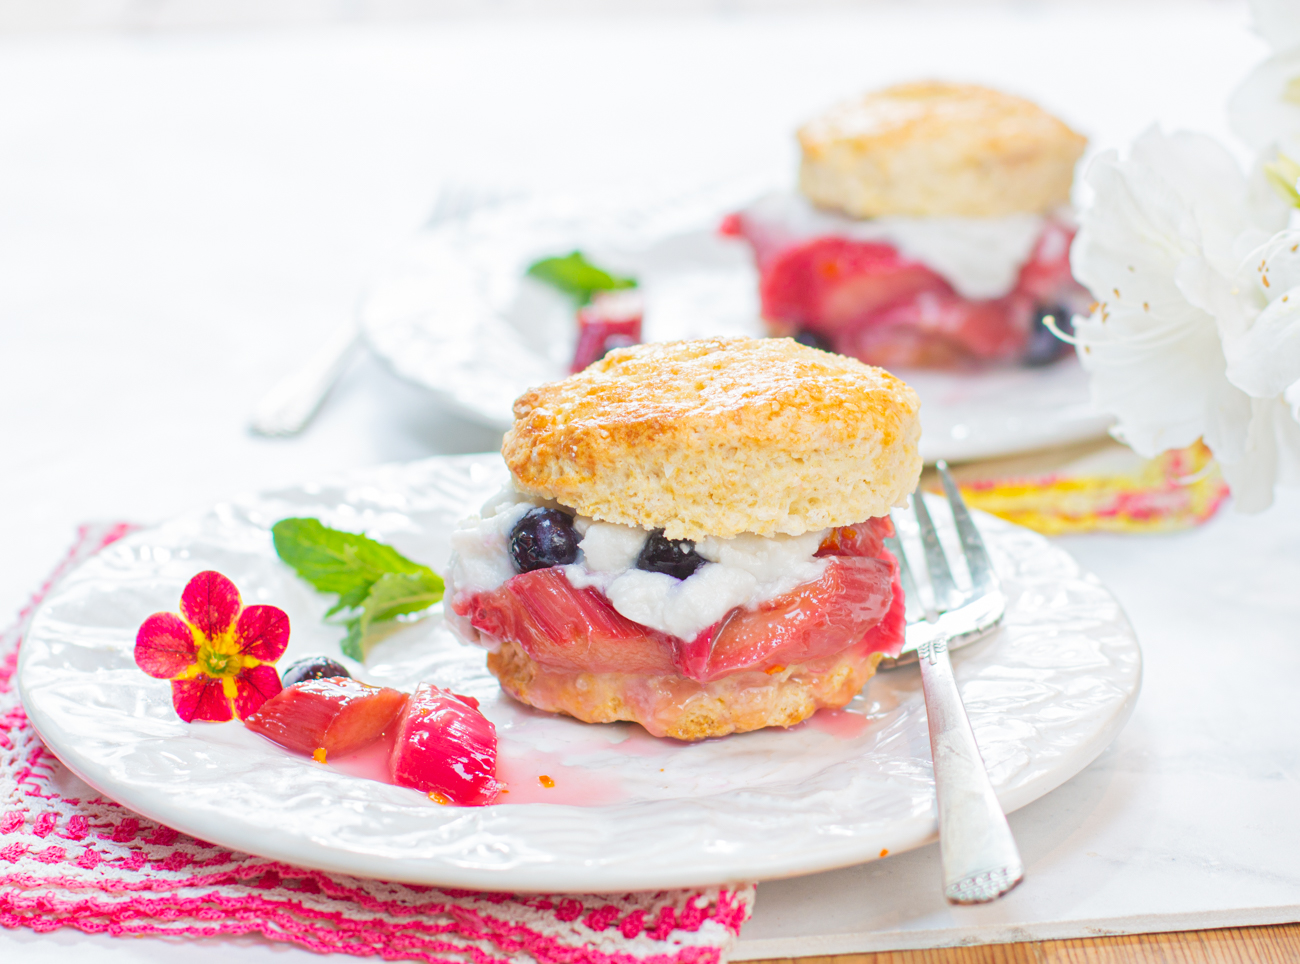 Shortcakes with Rhubarb, Blueberries and Coconut Whipped Cream